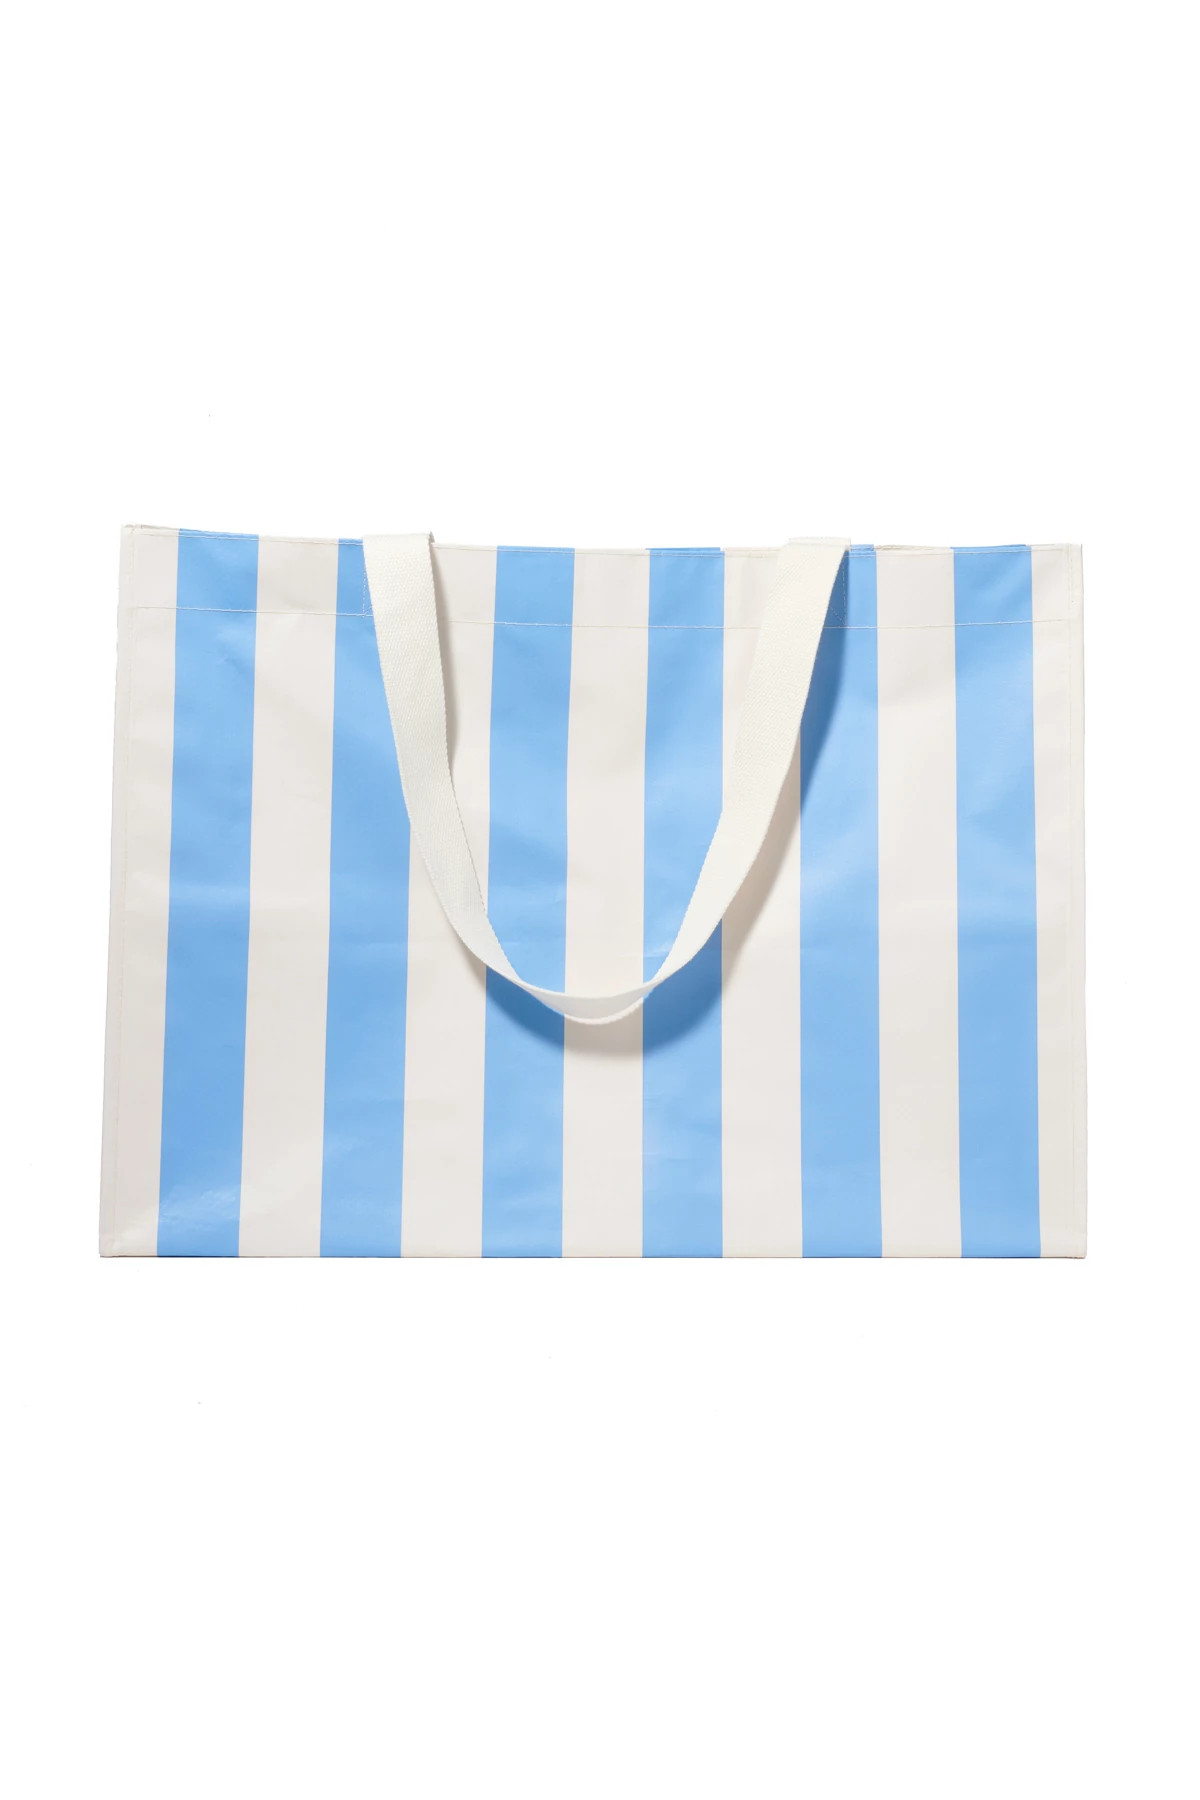 BLUE Carryall Beach Tote image number 1